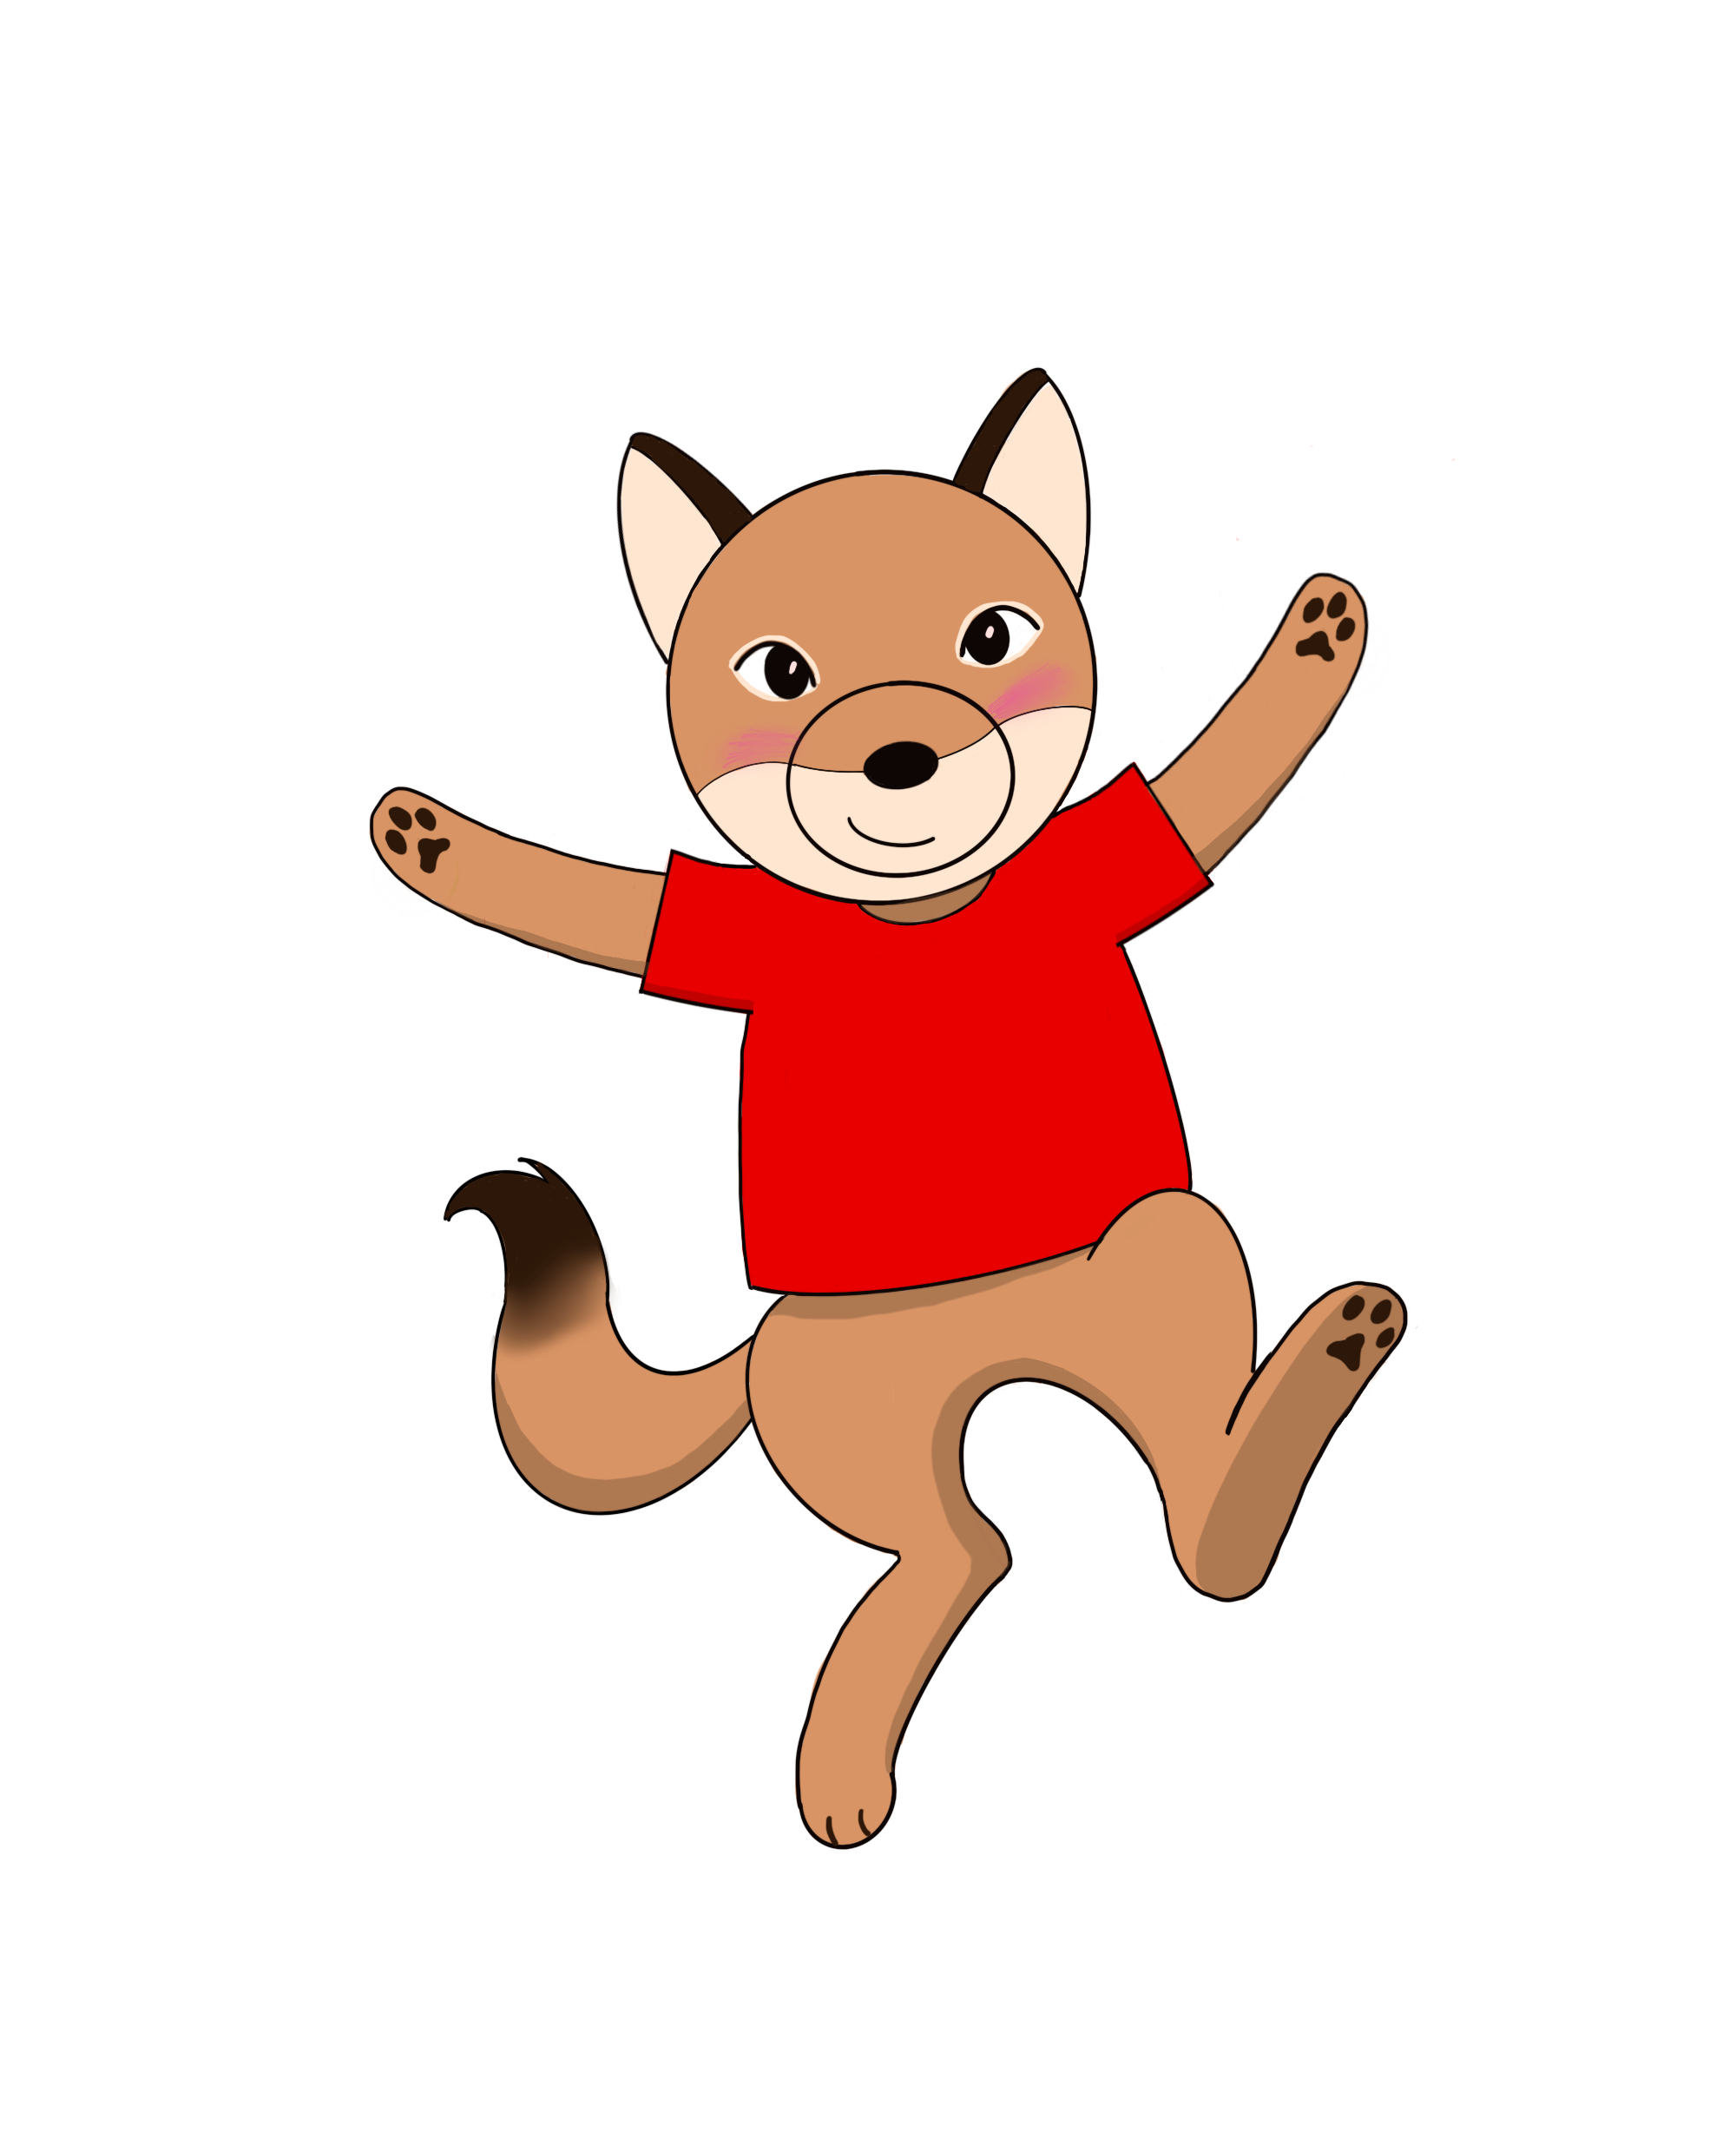 Odi the Library Coyote in a red shirt, with arms raised